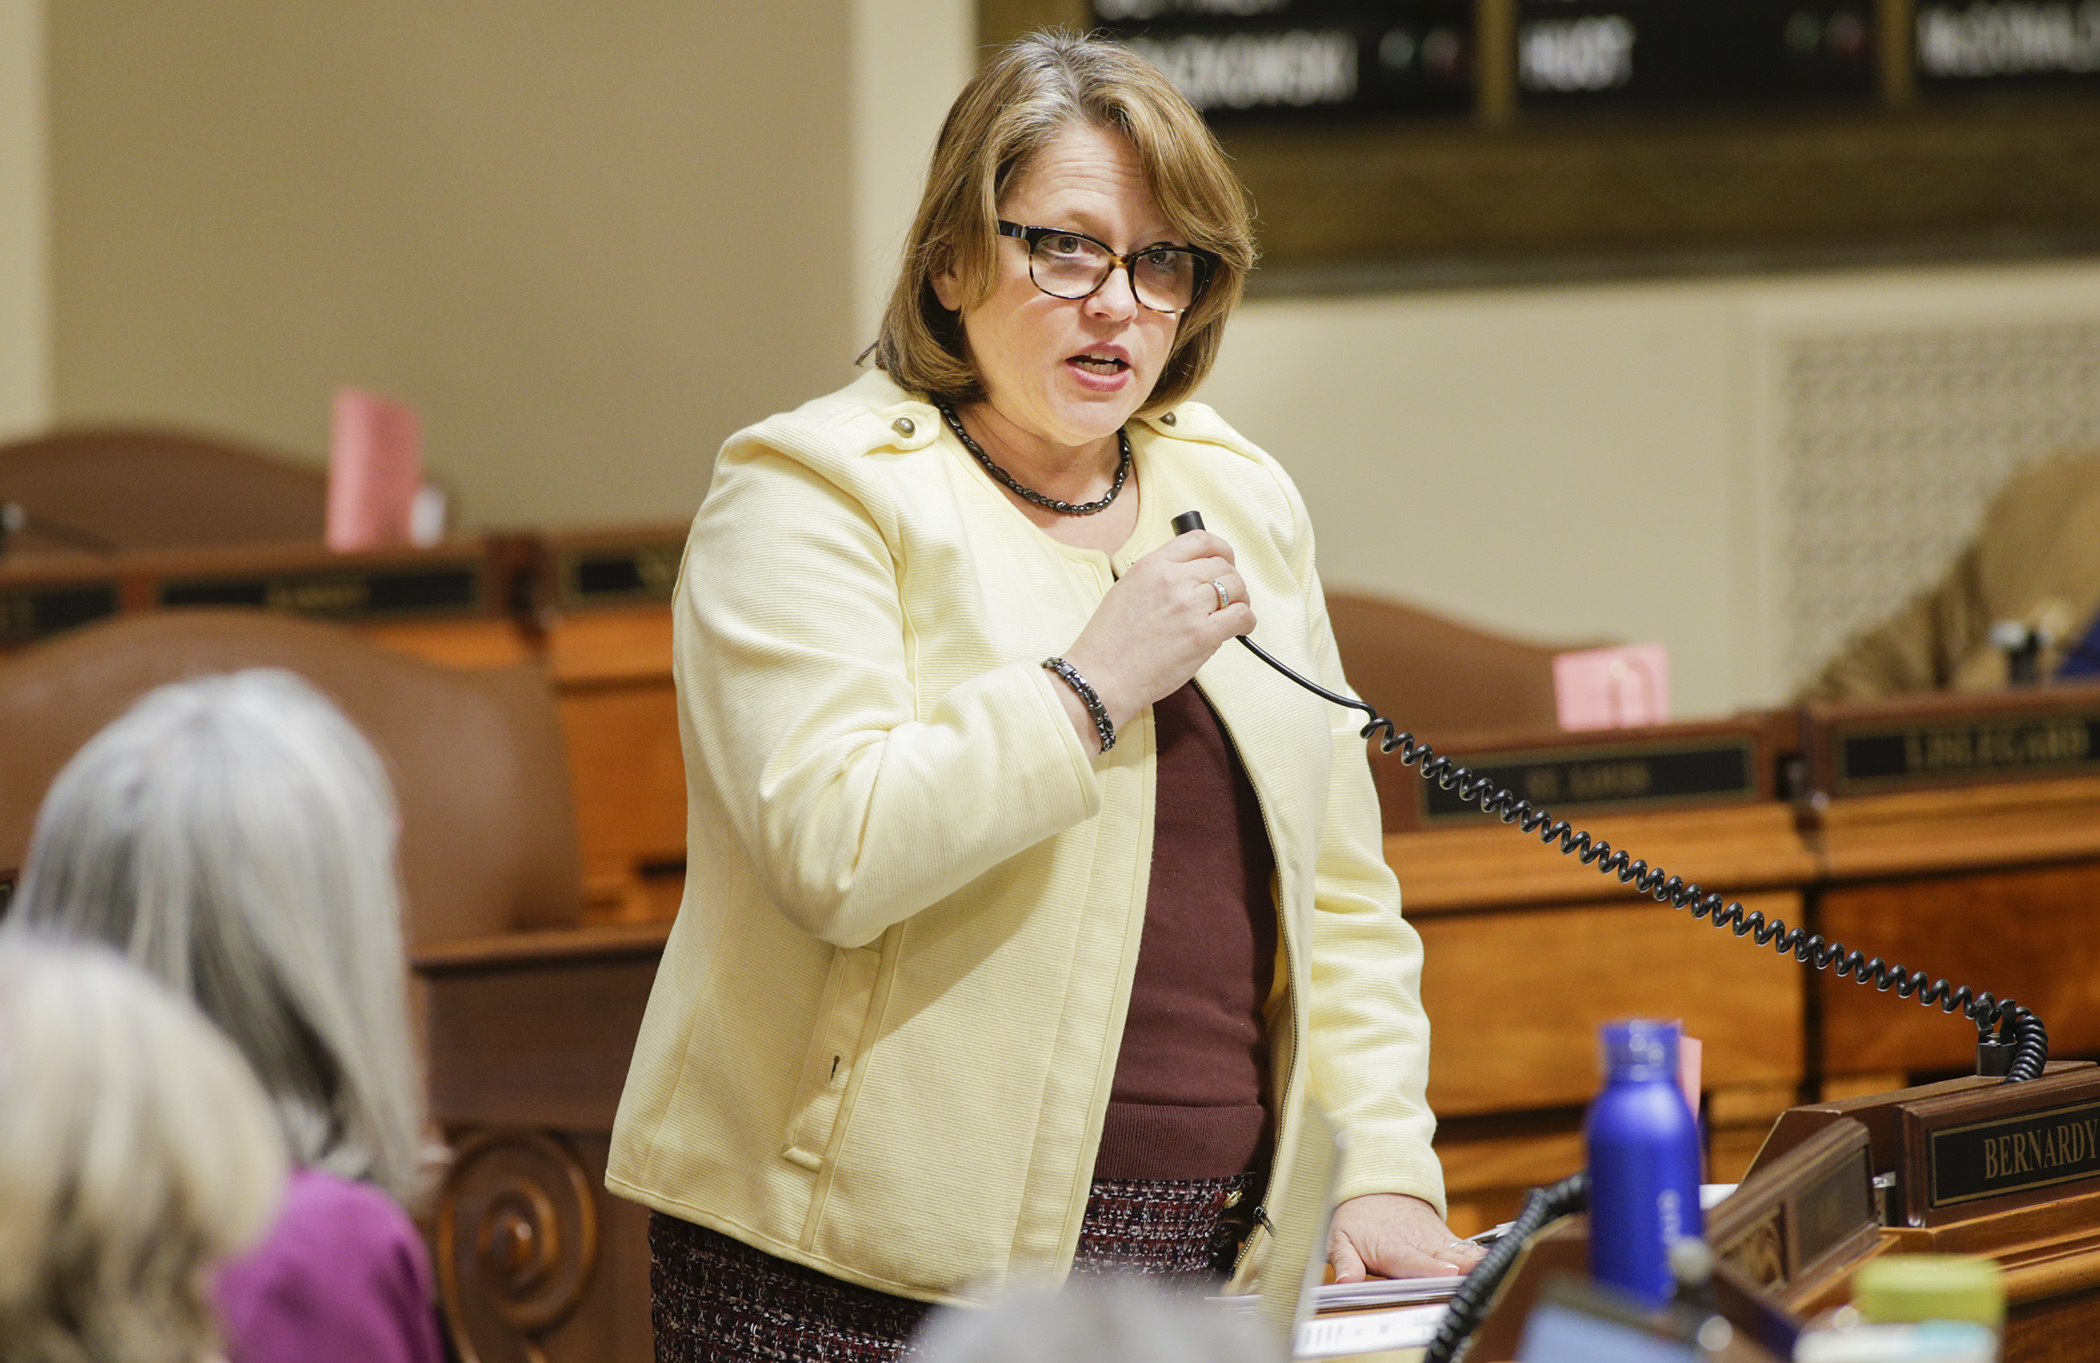 Rep. Connie Bernardy comments during floor debate May 9 on HF2849, which would provide financial aid to former students of Argosy University in Eagan, which abruptly closed in March. Photo by Paul Battaglia